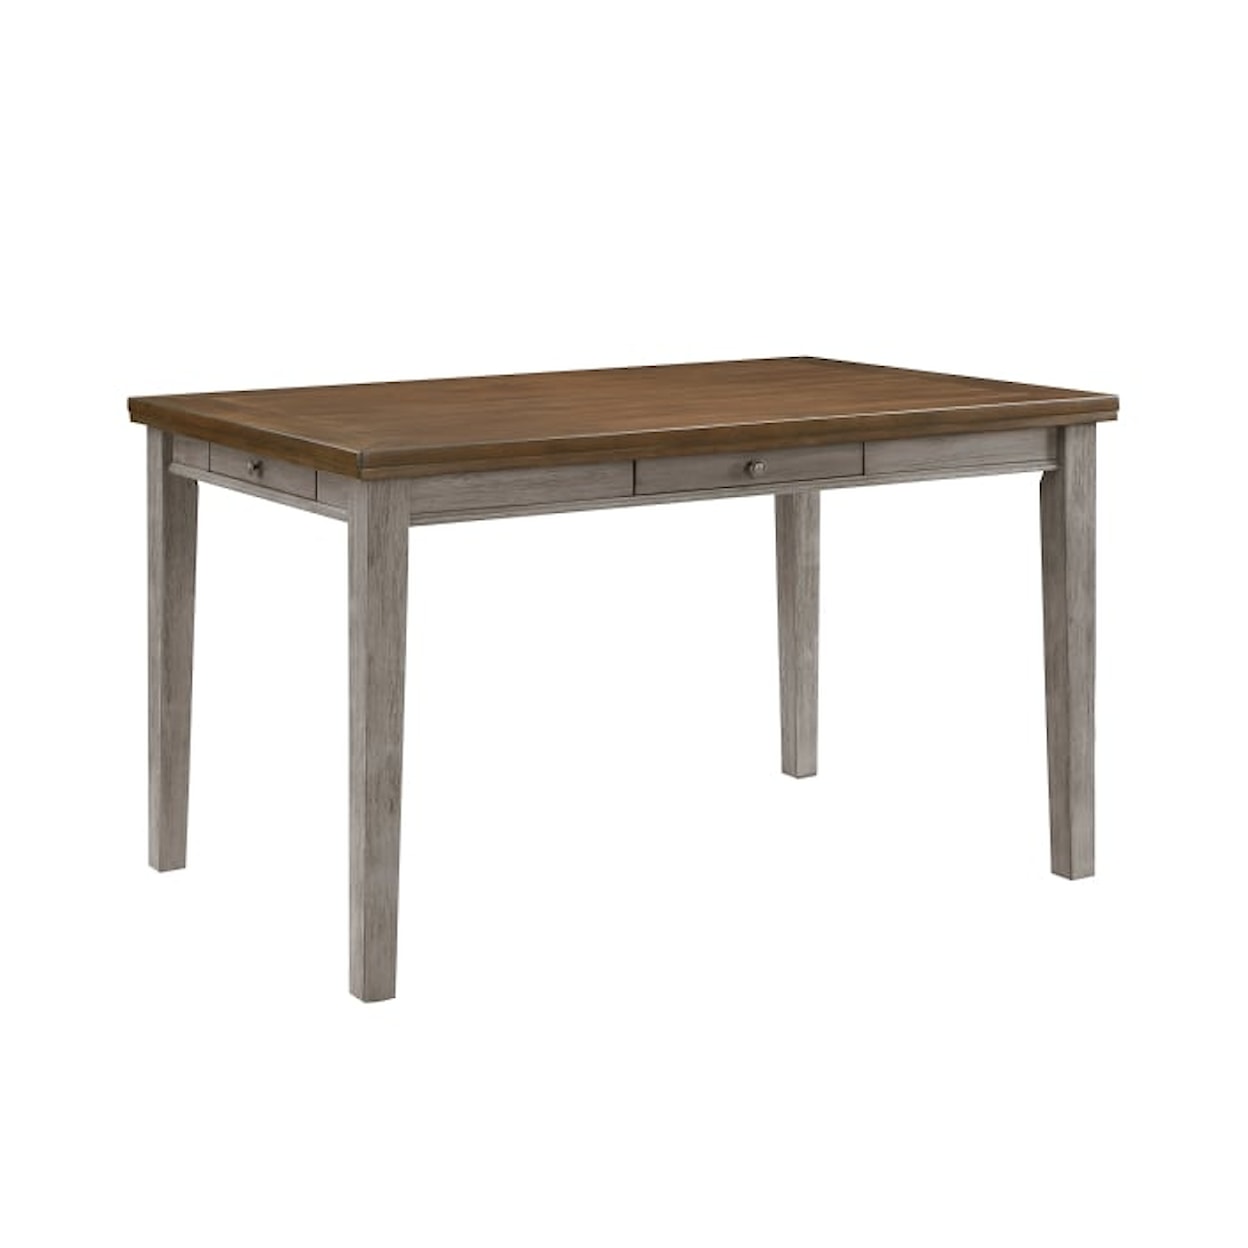 Homelegance Tigard 4-Drawer Dining Table